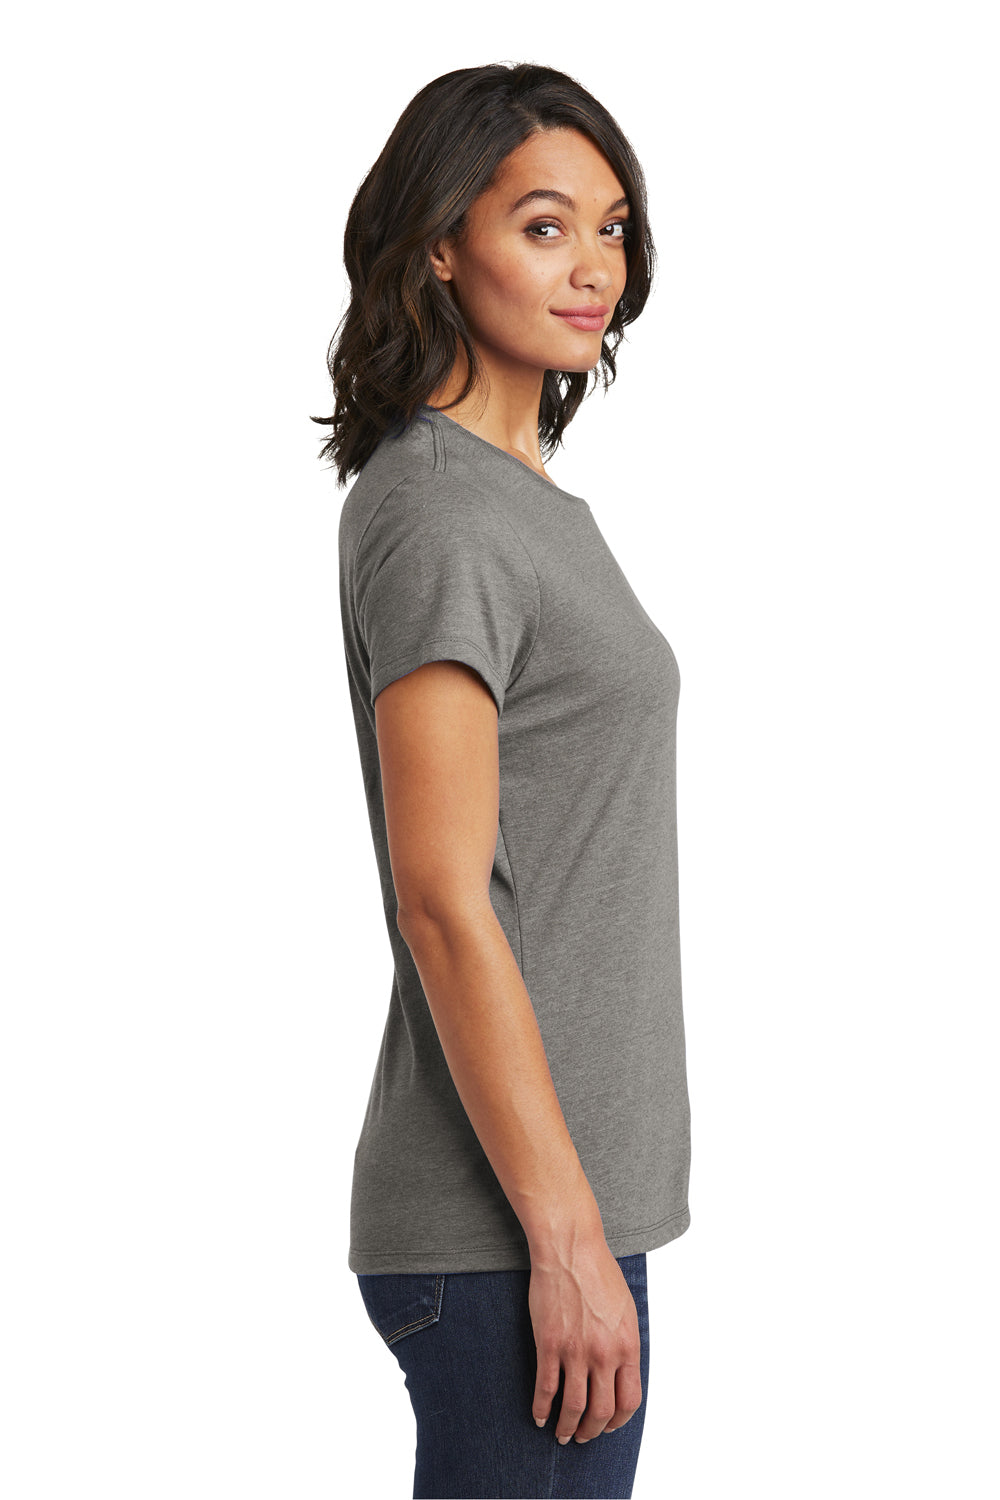 District DT6002 Womens Very Important Short Sleeve Crewneck T-Shirt Heather Grey Side